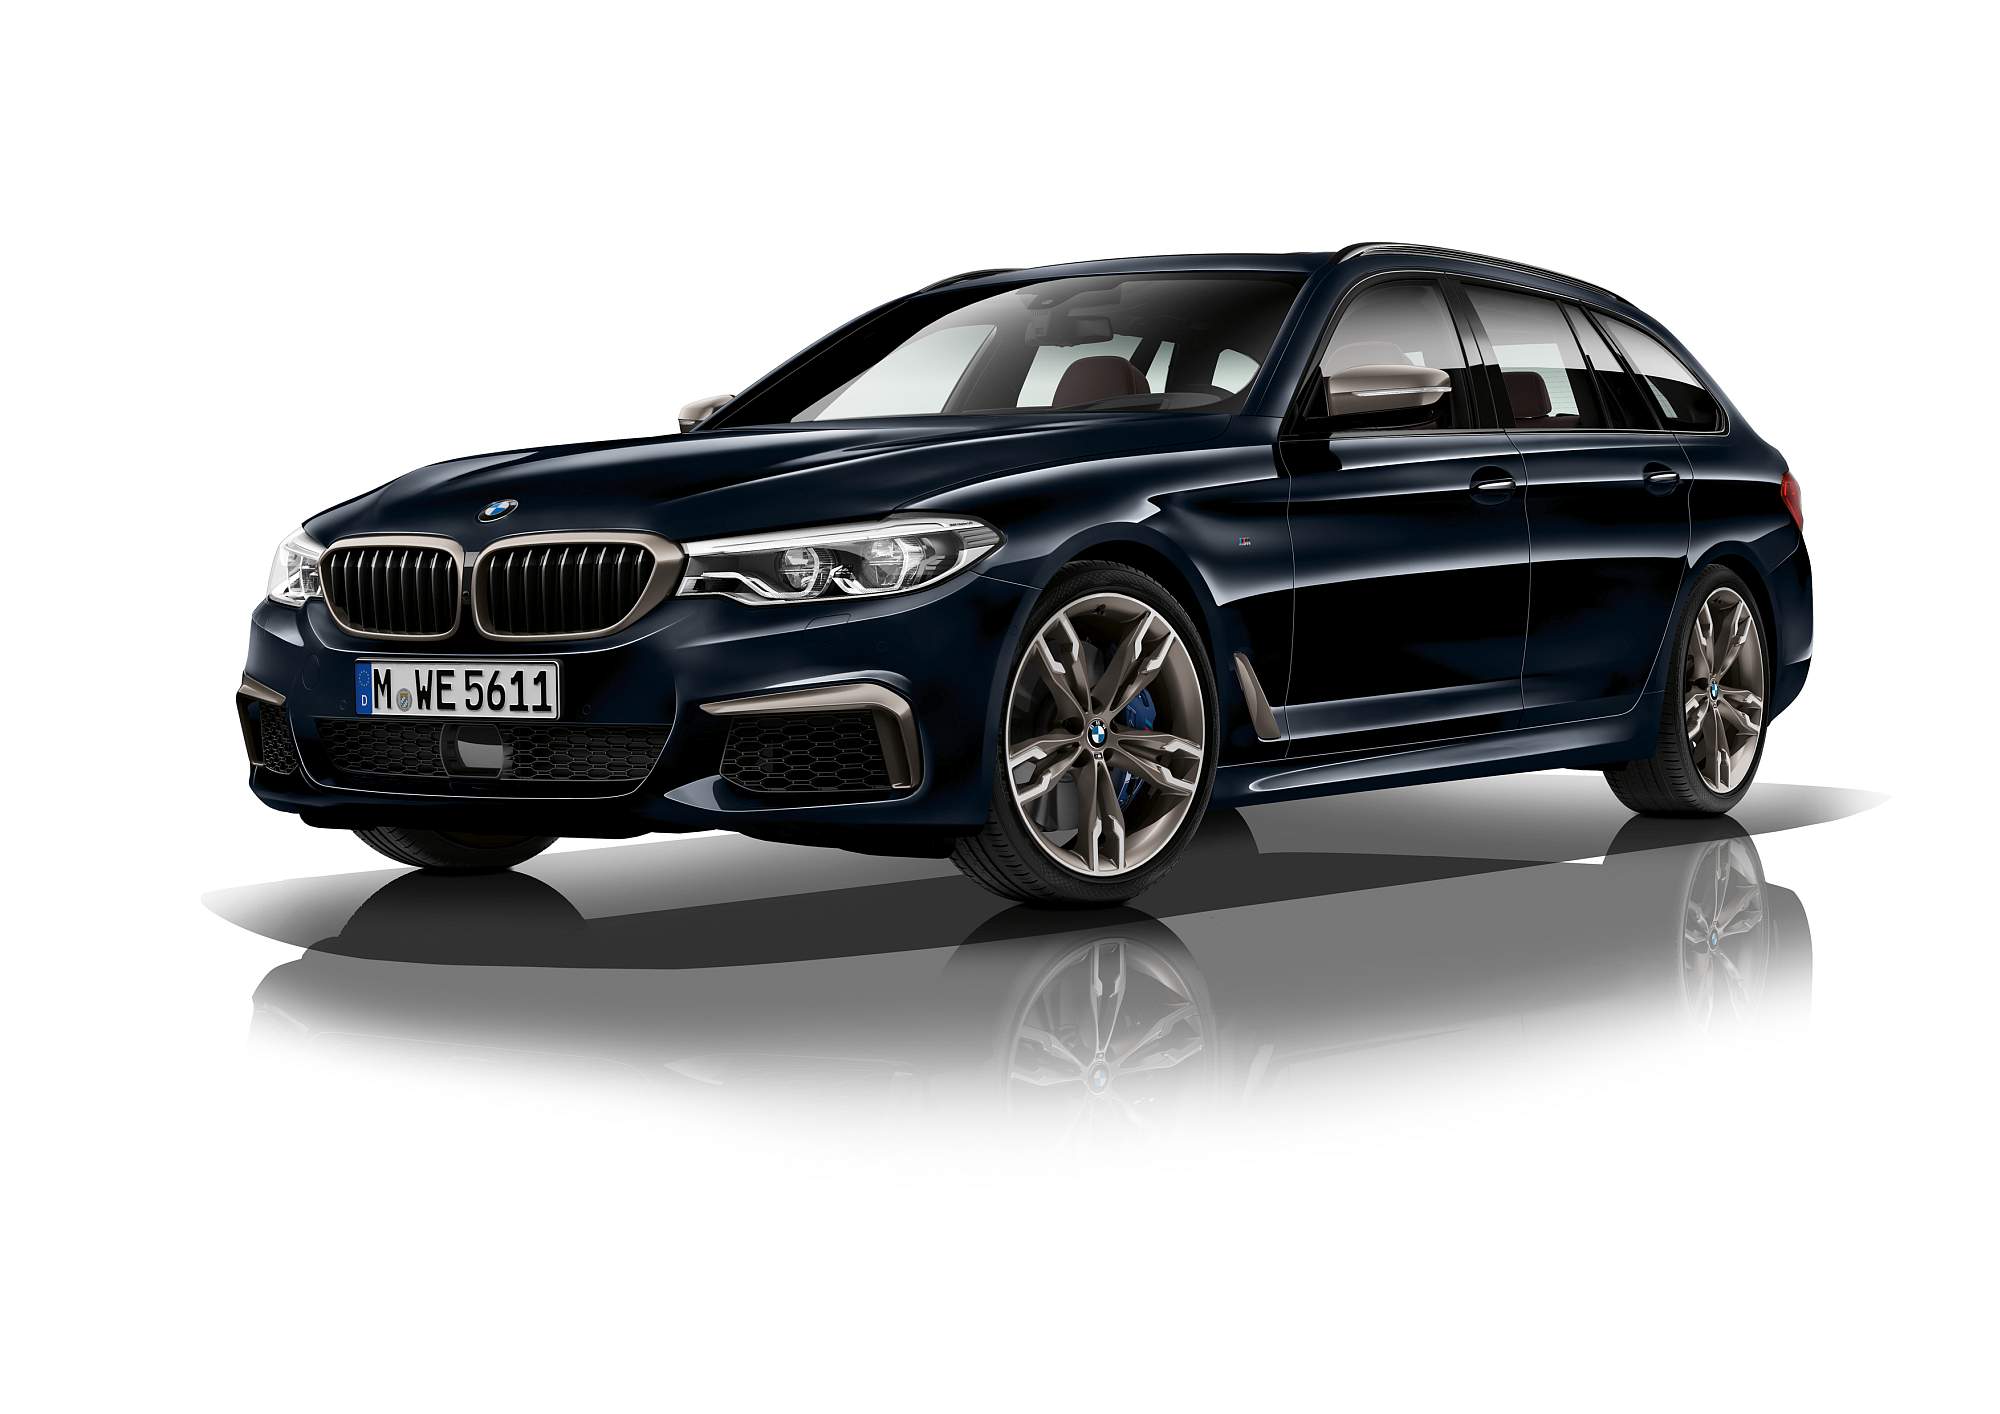 P90255113_highRes_the-new-bmw-m550d-xd